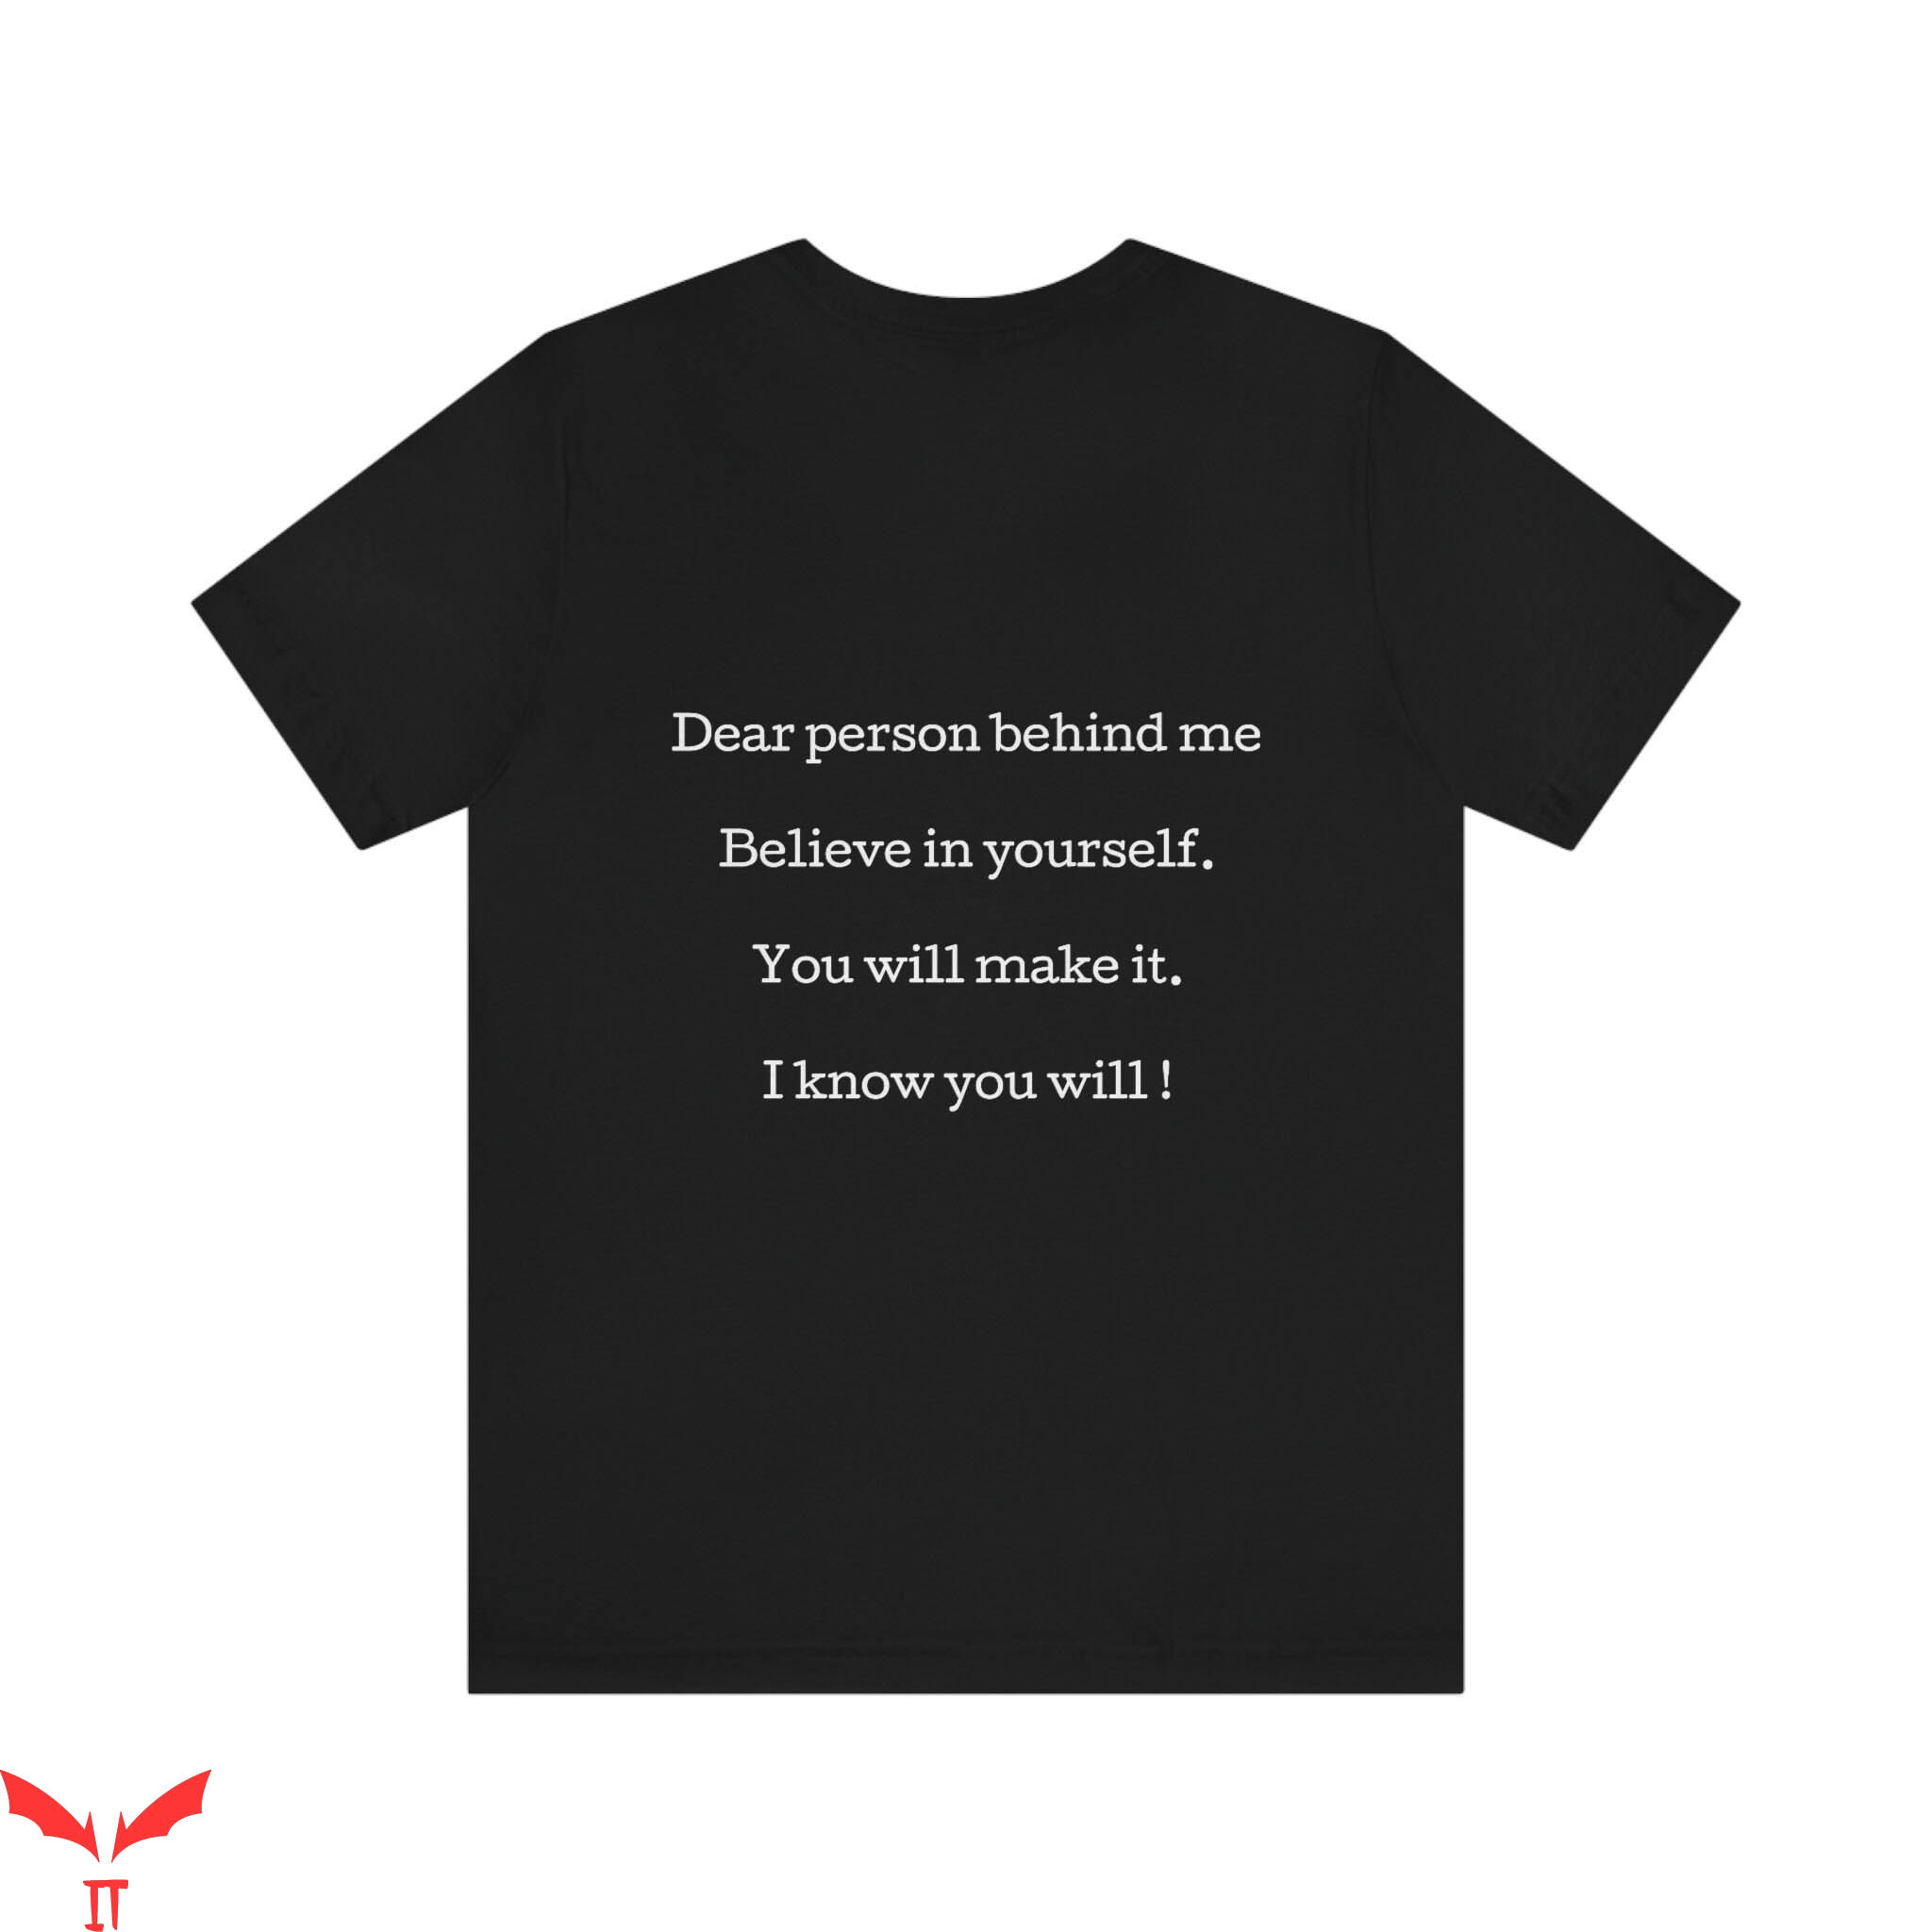 Dear Person Behind Me T-Shirt Cool Design Philosophy Tee